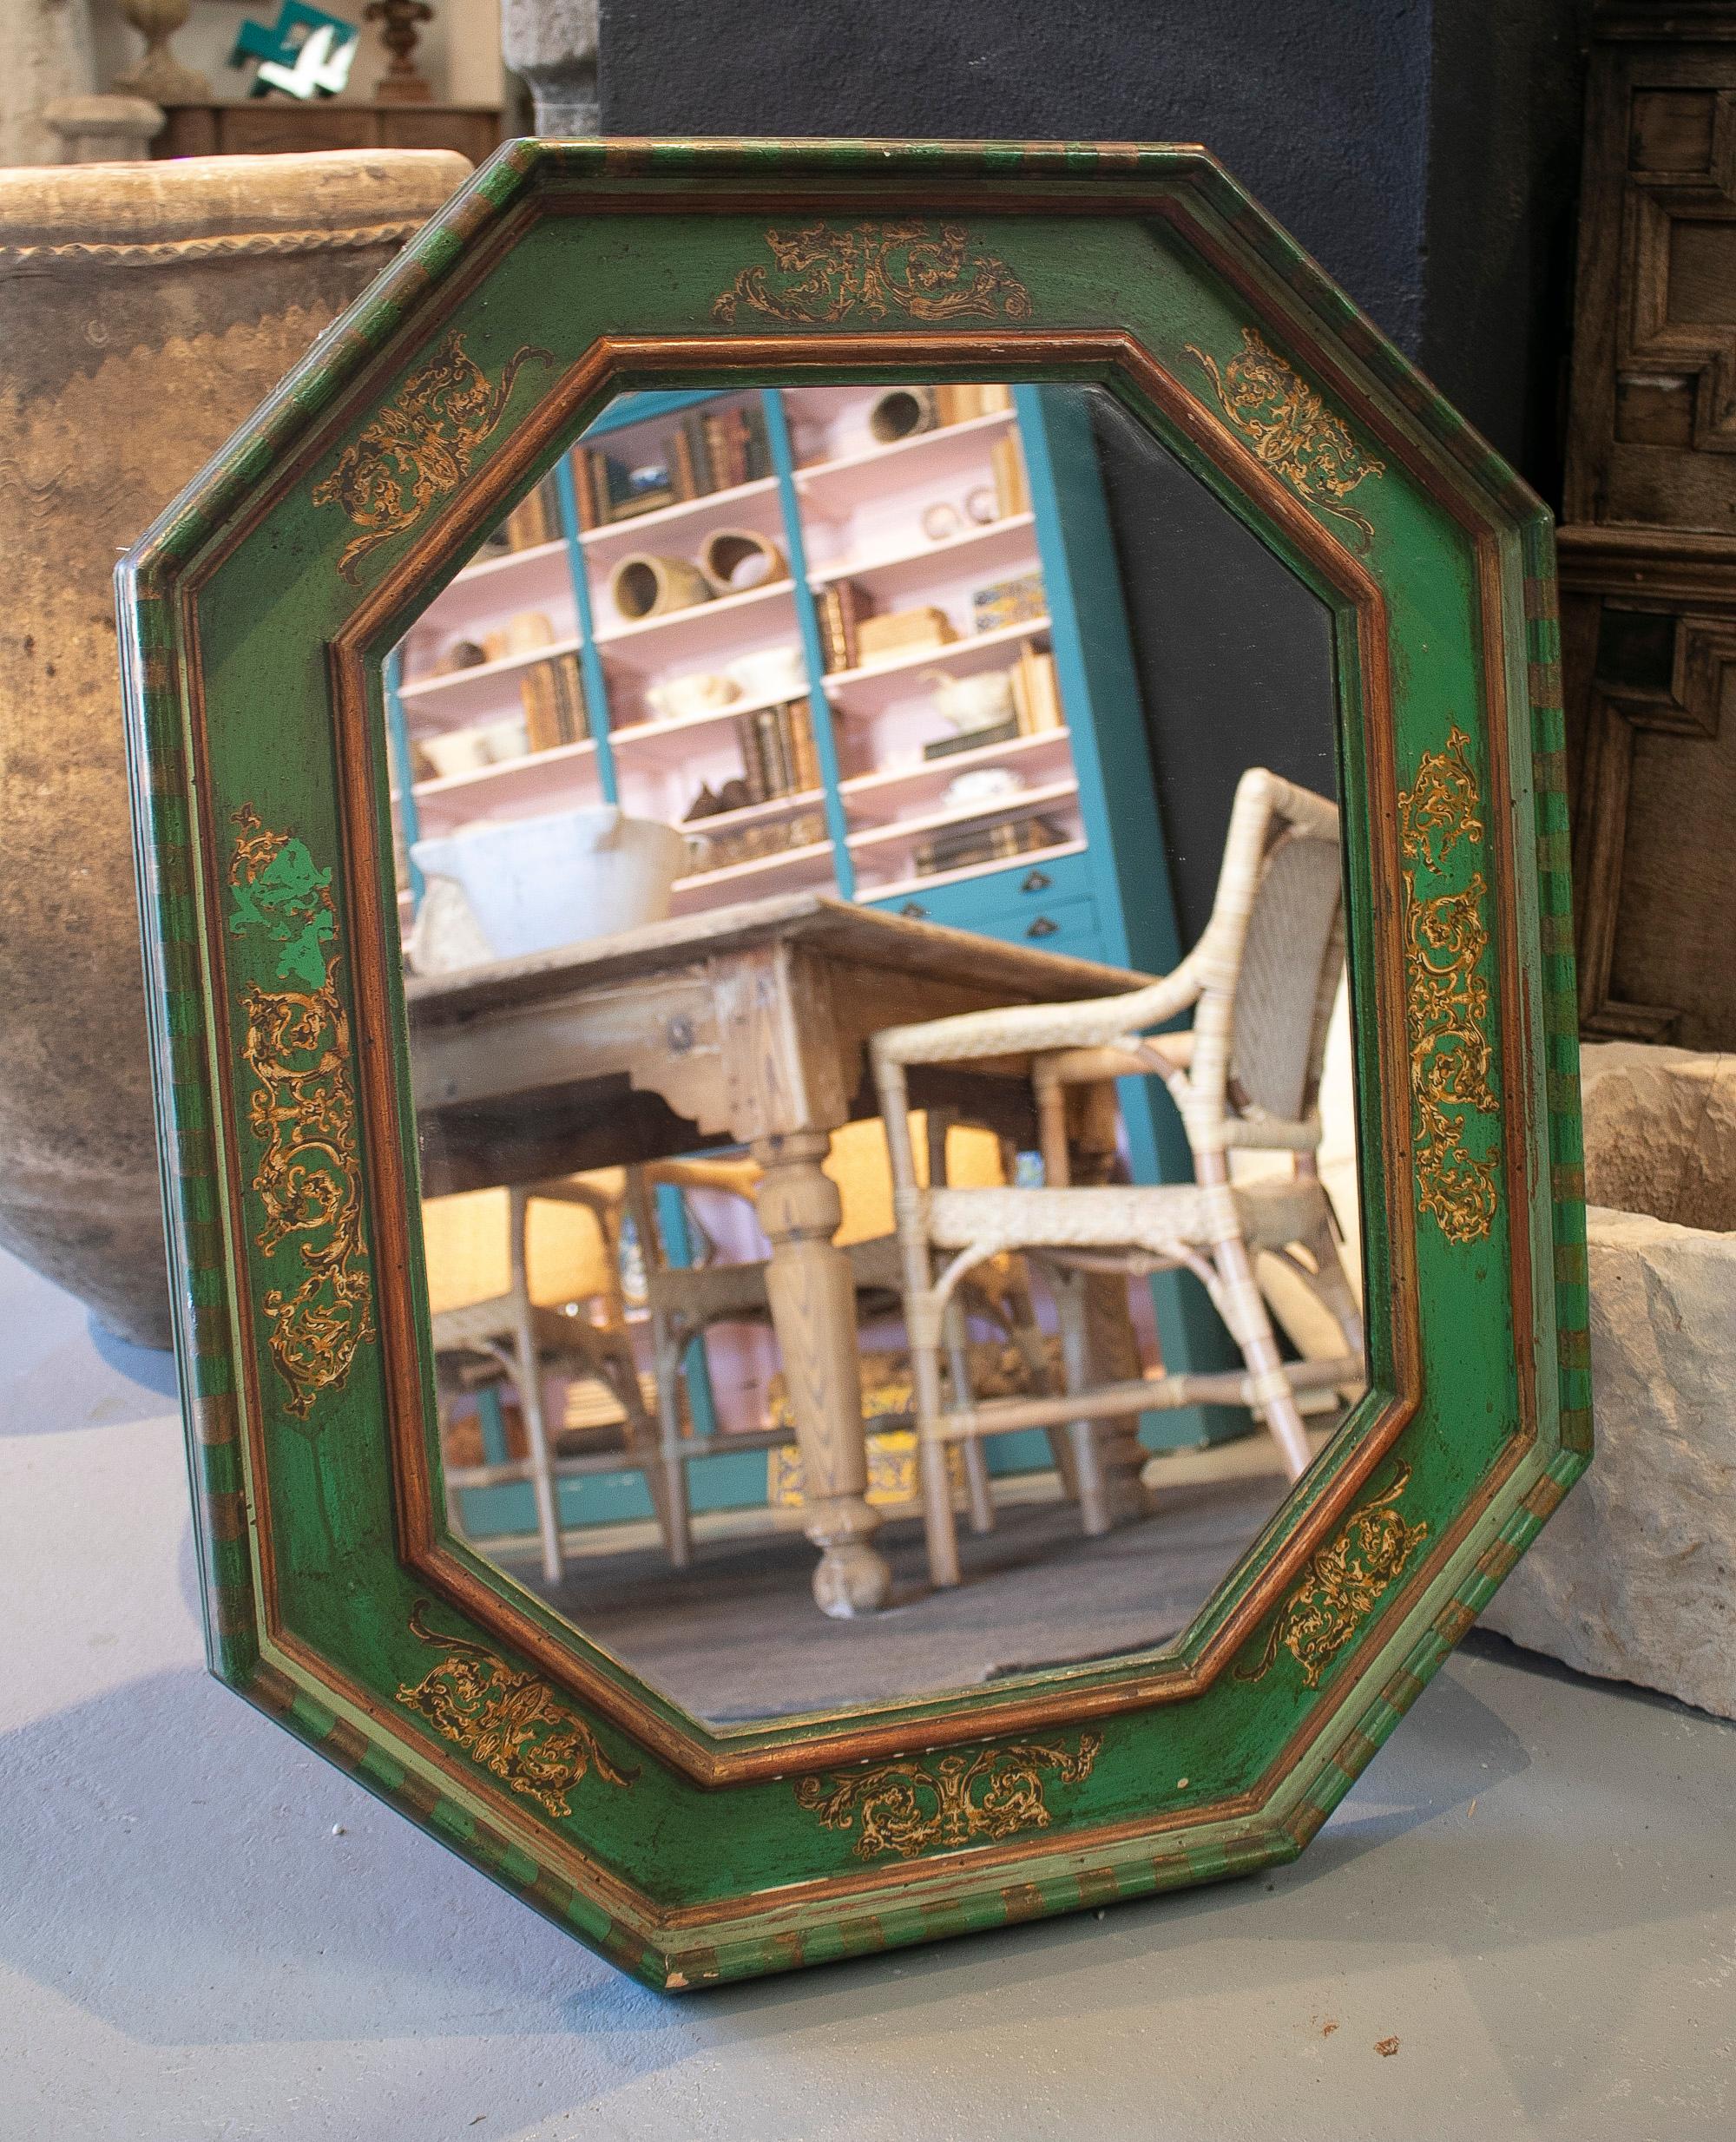 Vintage 1980s Spanish wooden wall mirror with green and gold painted frame.
 